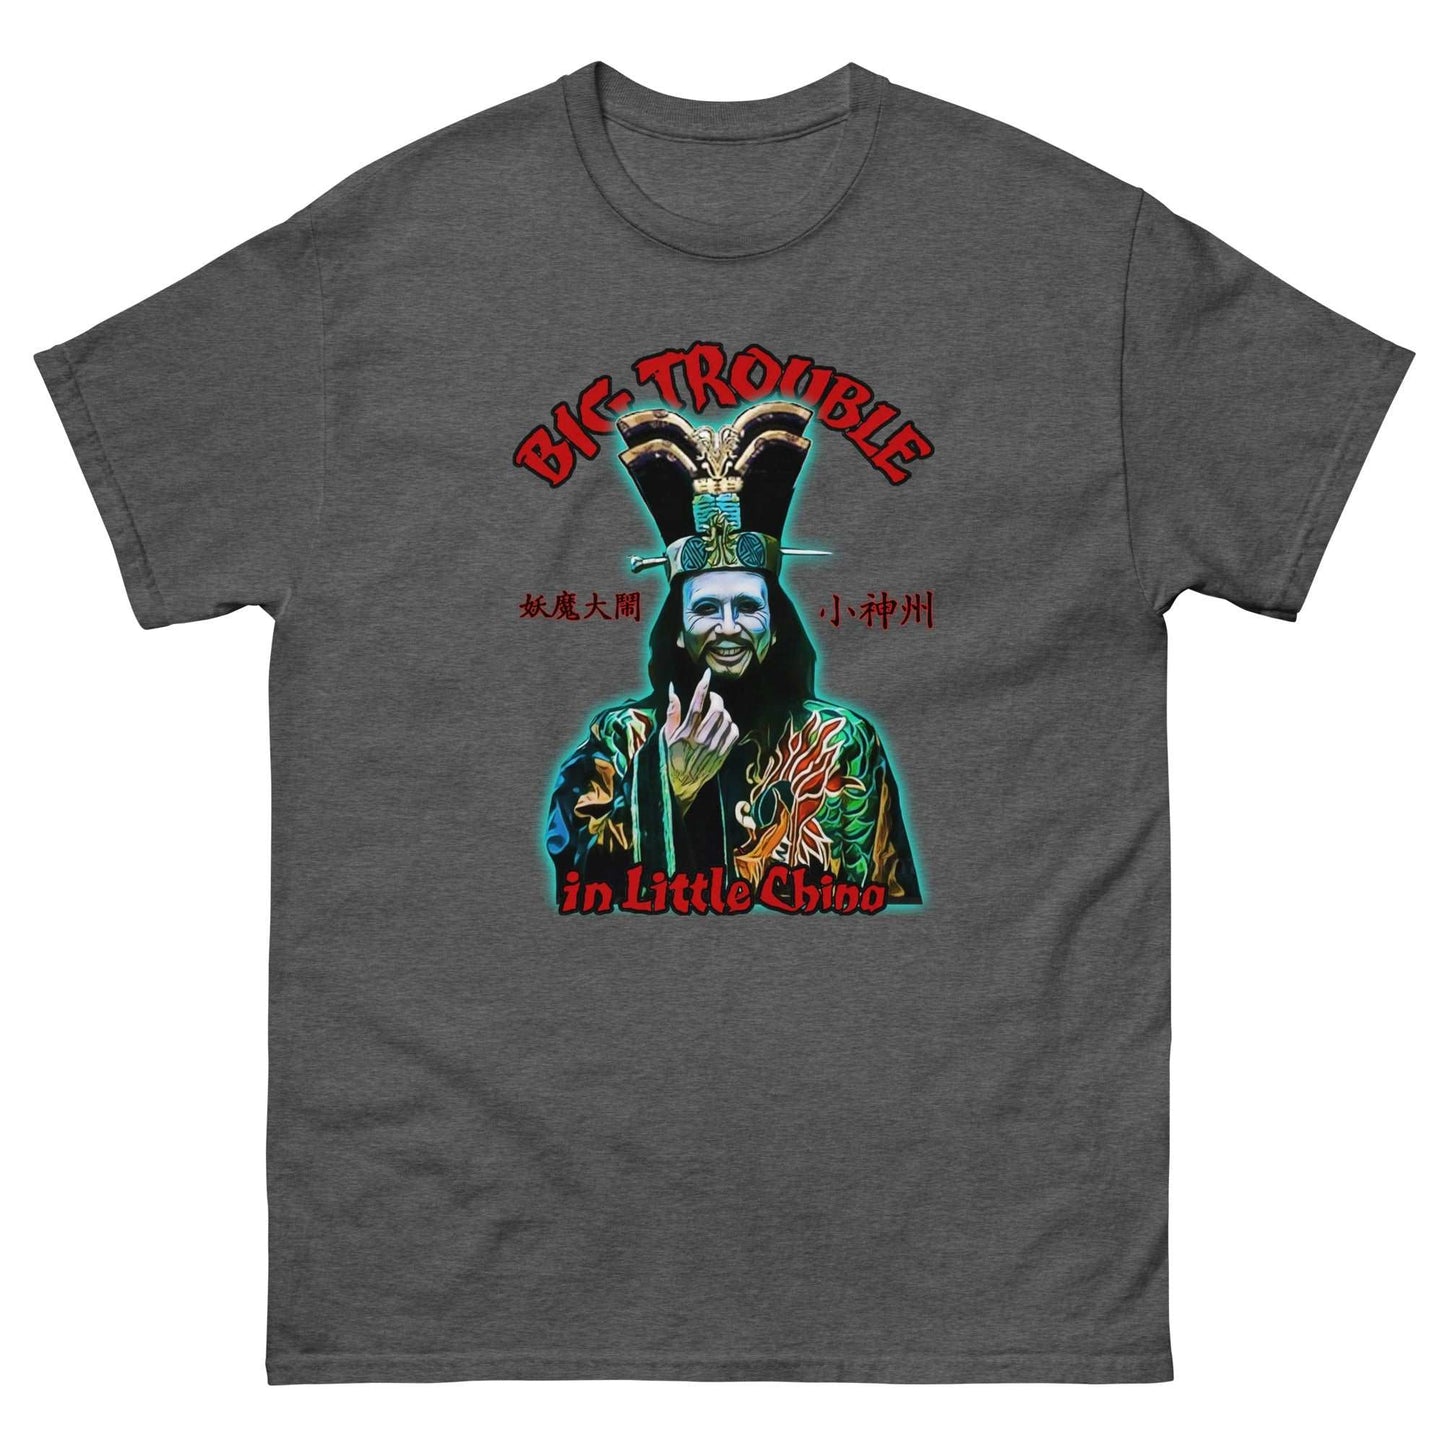 Big Trouble in The Little China Classic T-Shirt - Grey Heather